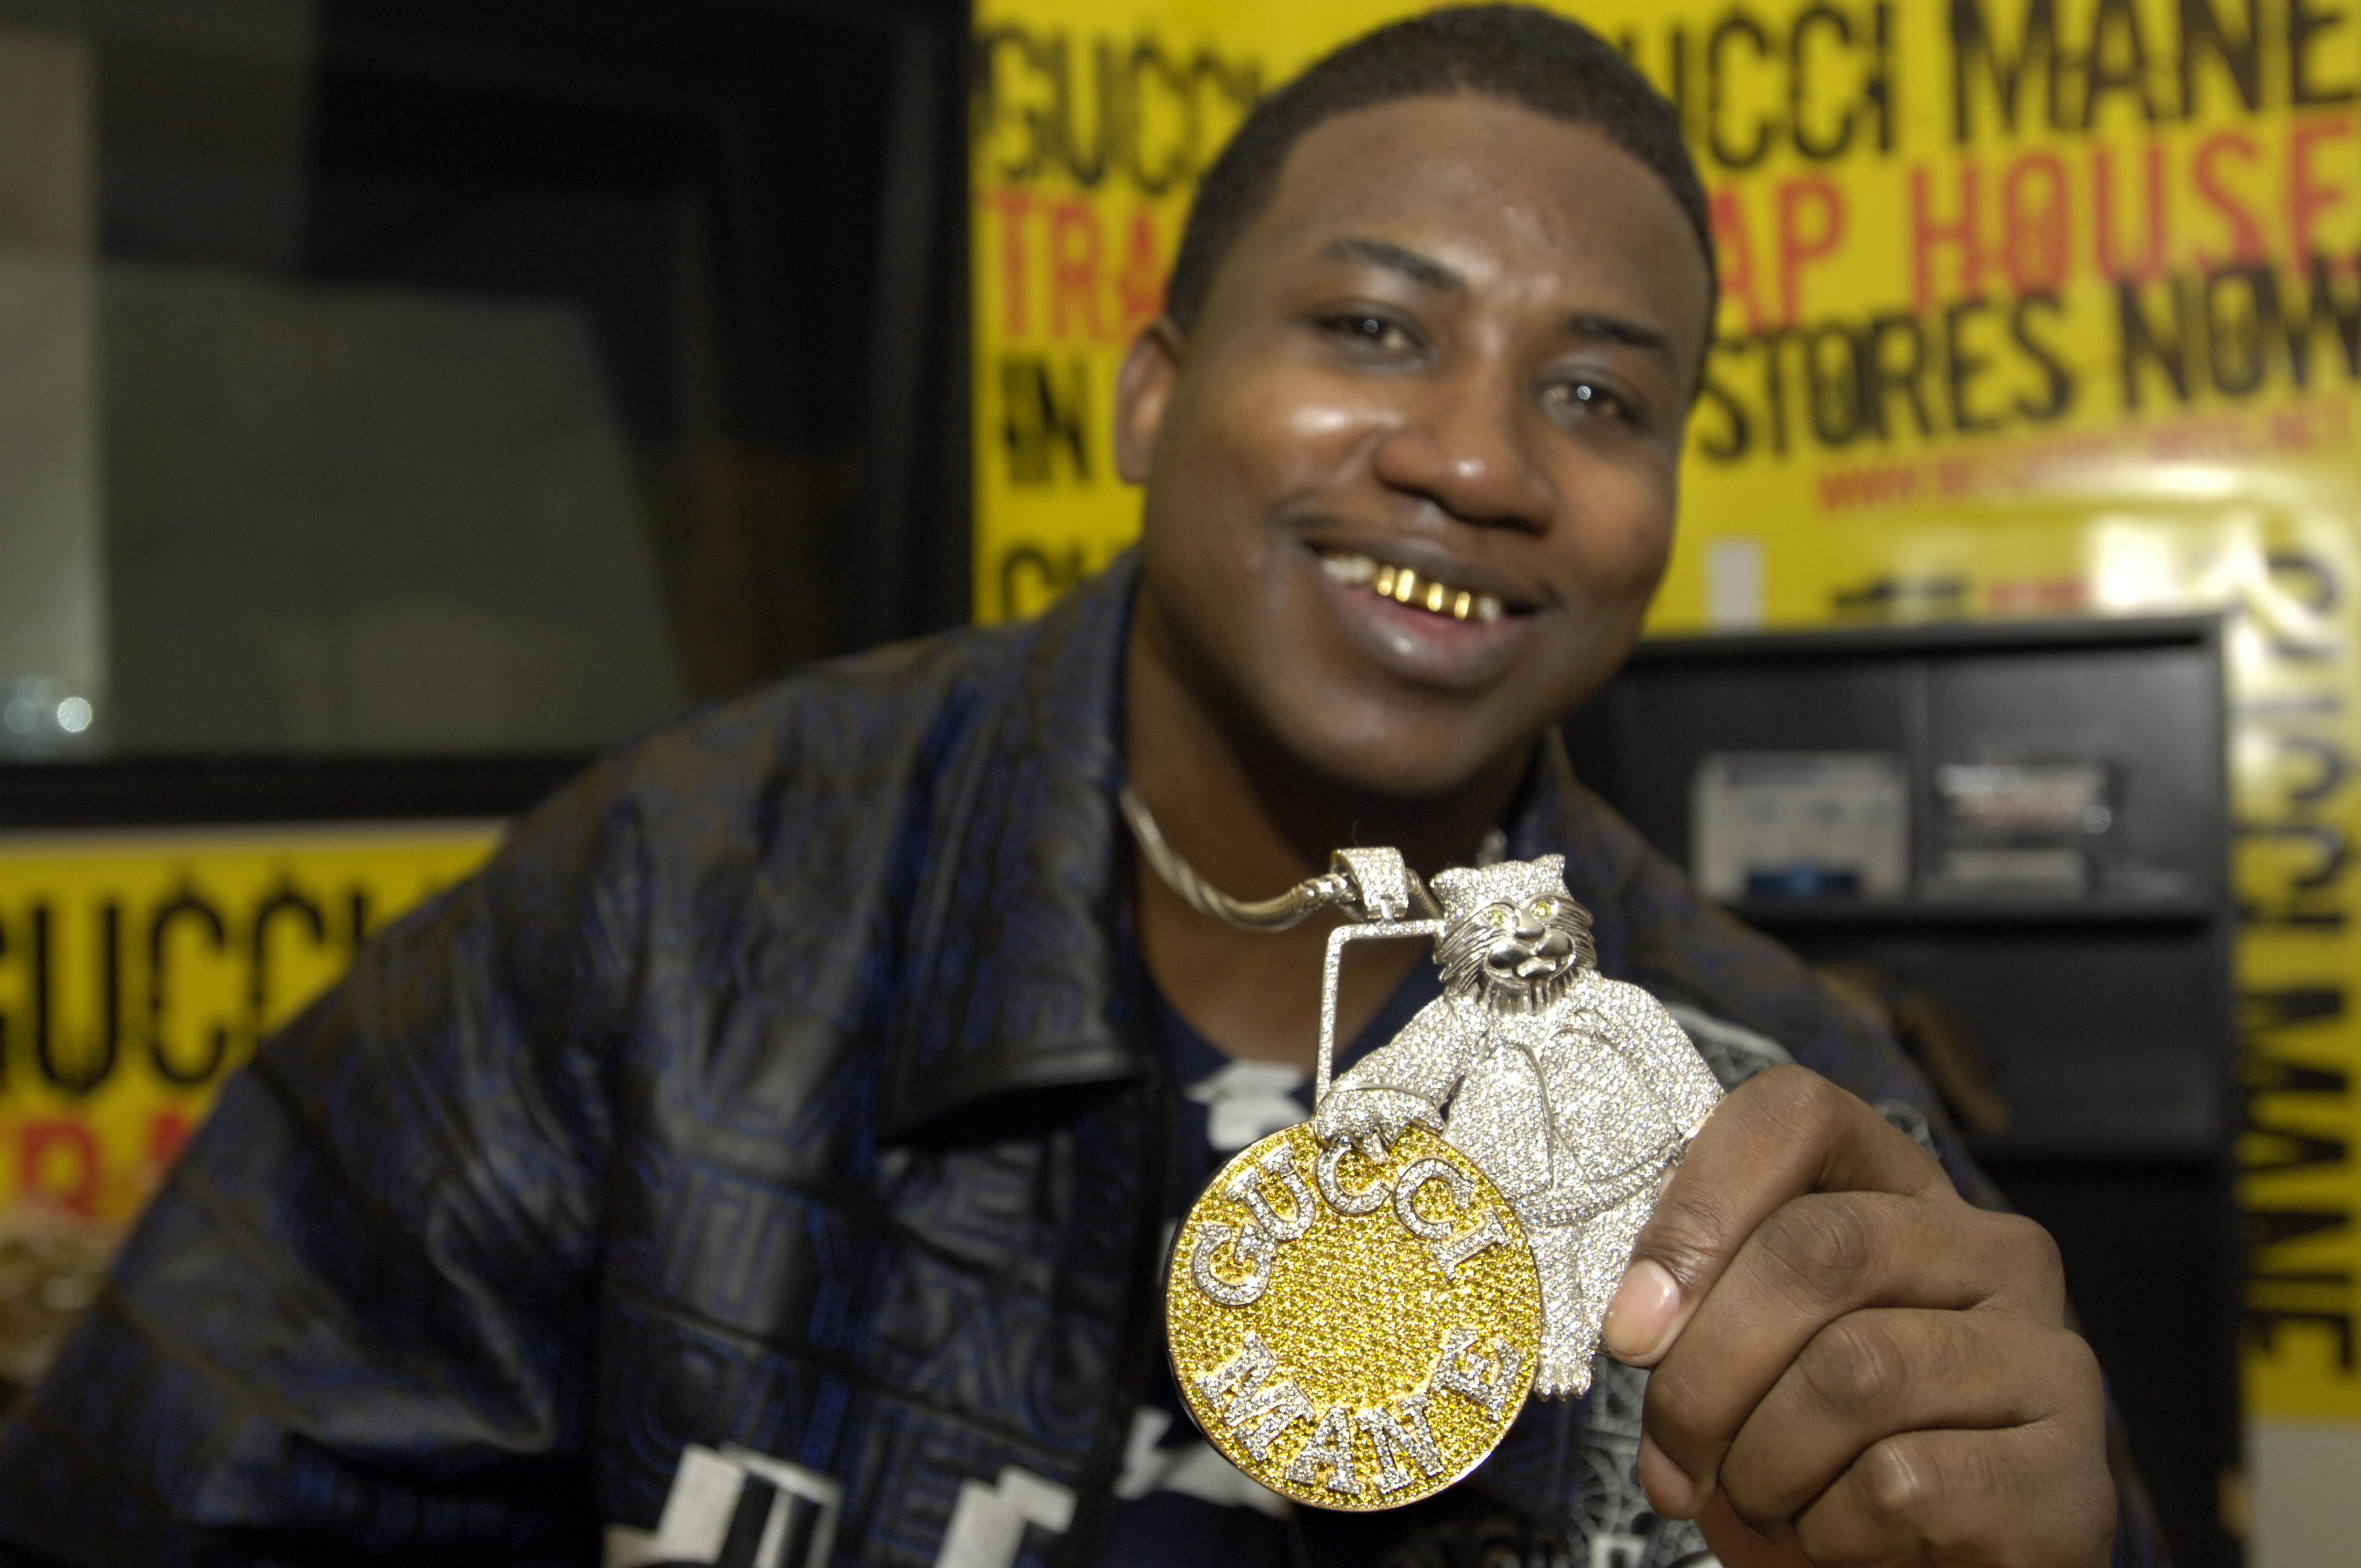 Gucci Mane brings back '06 Gucci in new song snippet